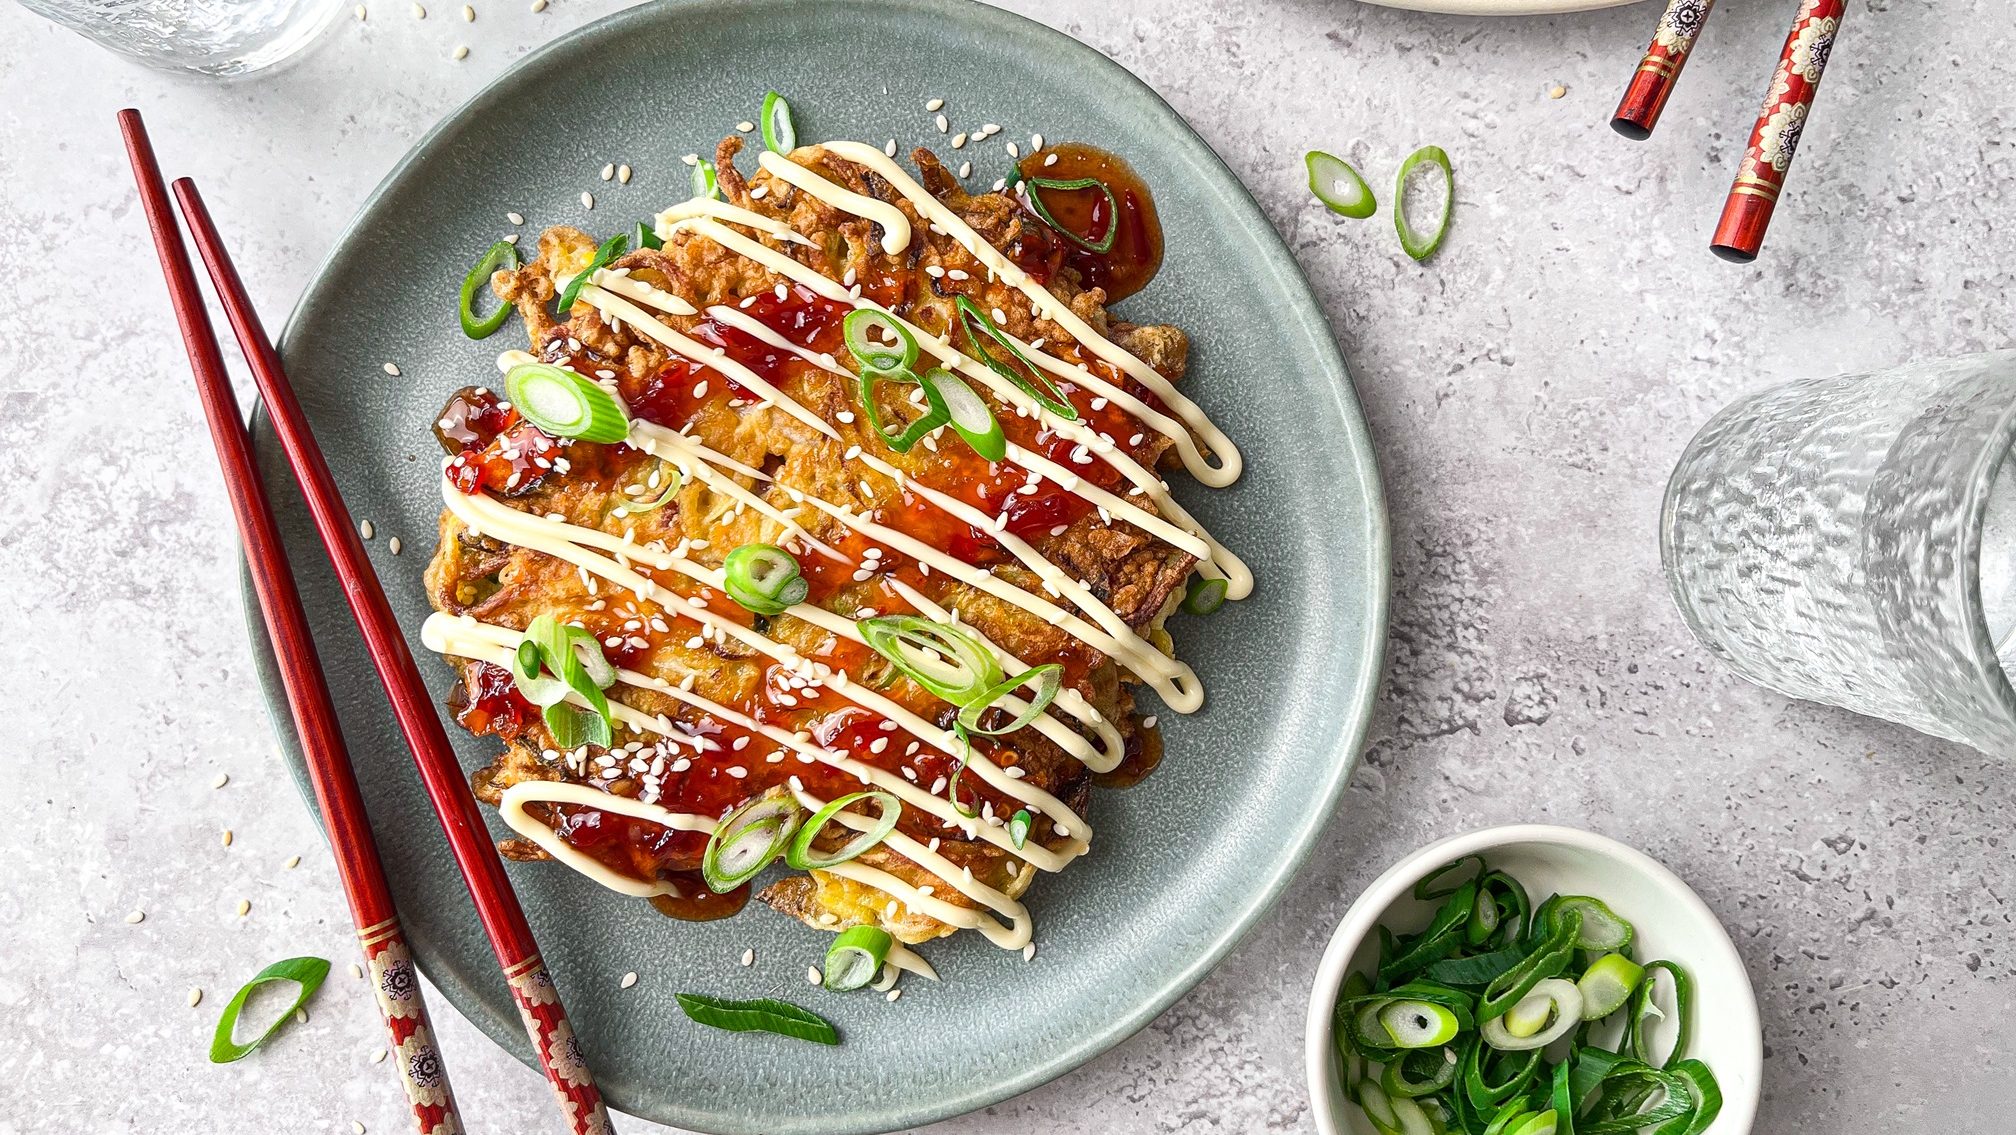 A pancake topped with red sauce, mayo and green onions. With chopsticks.